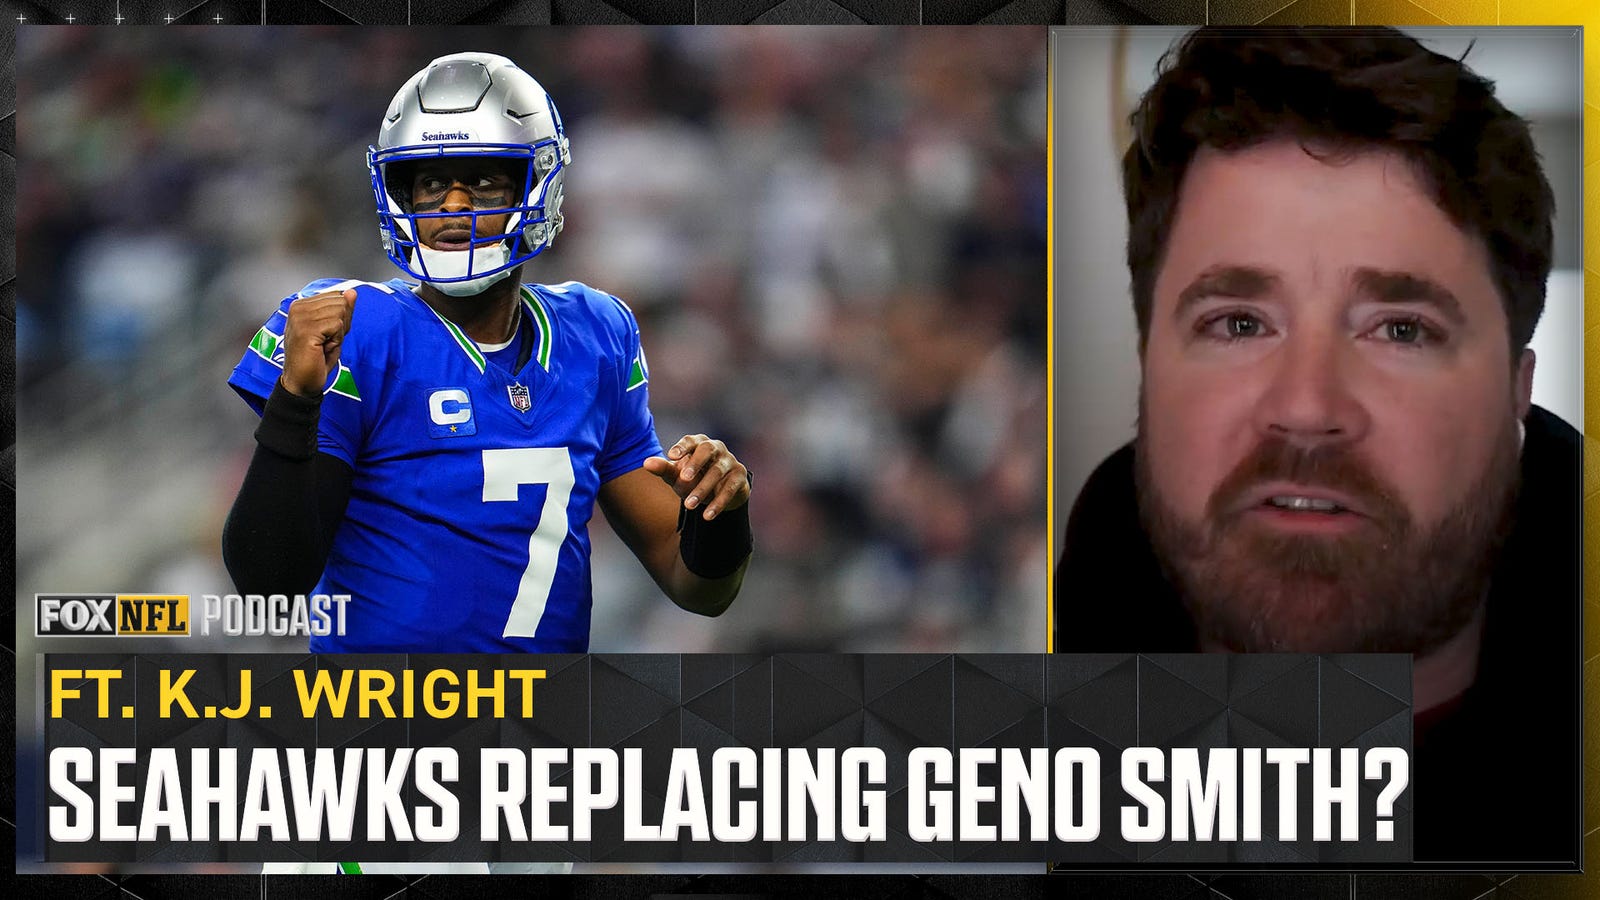 Will Seattle replace Geno Smith in the NFL Draft? 